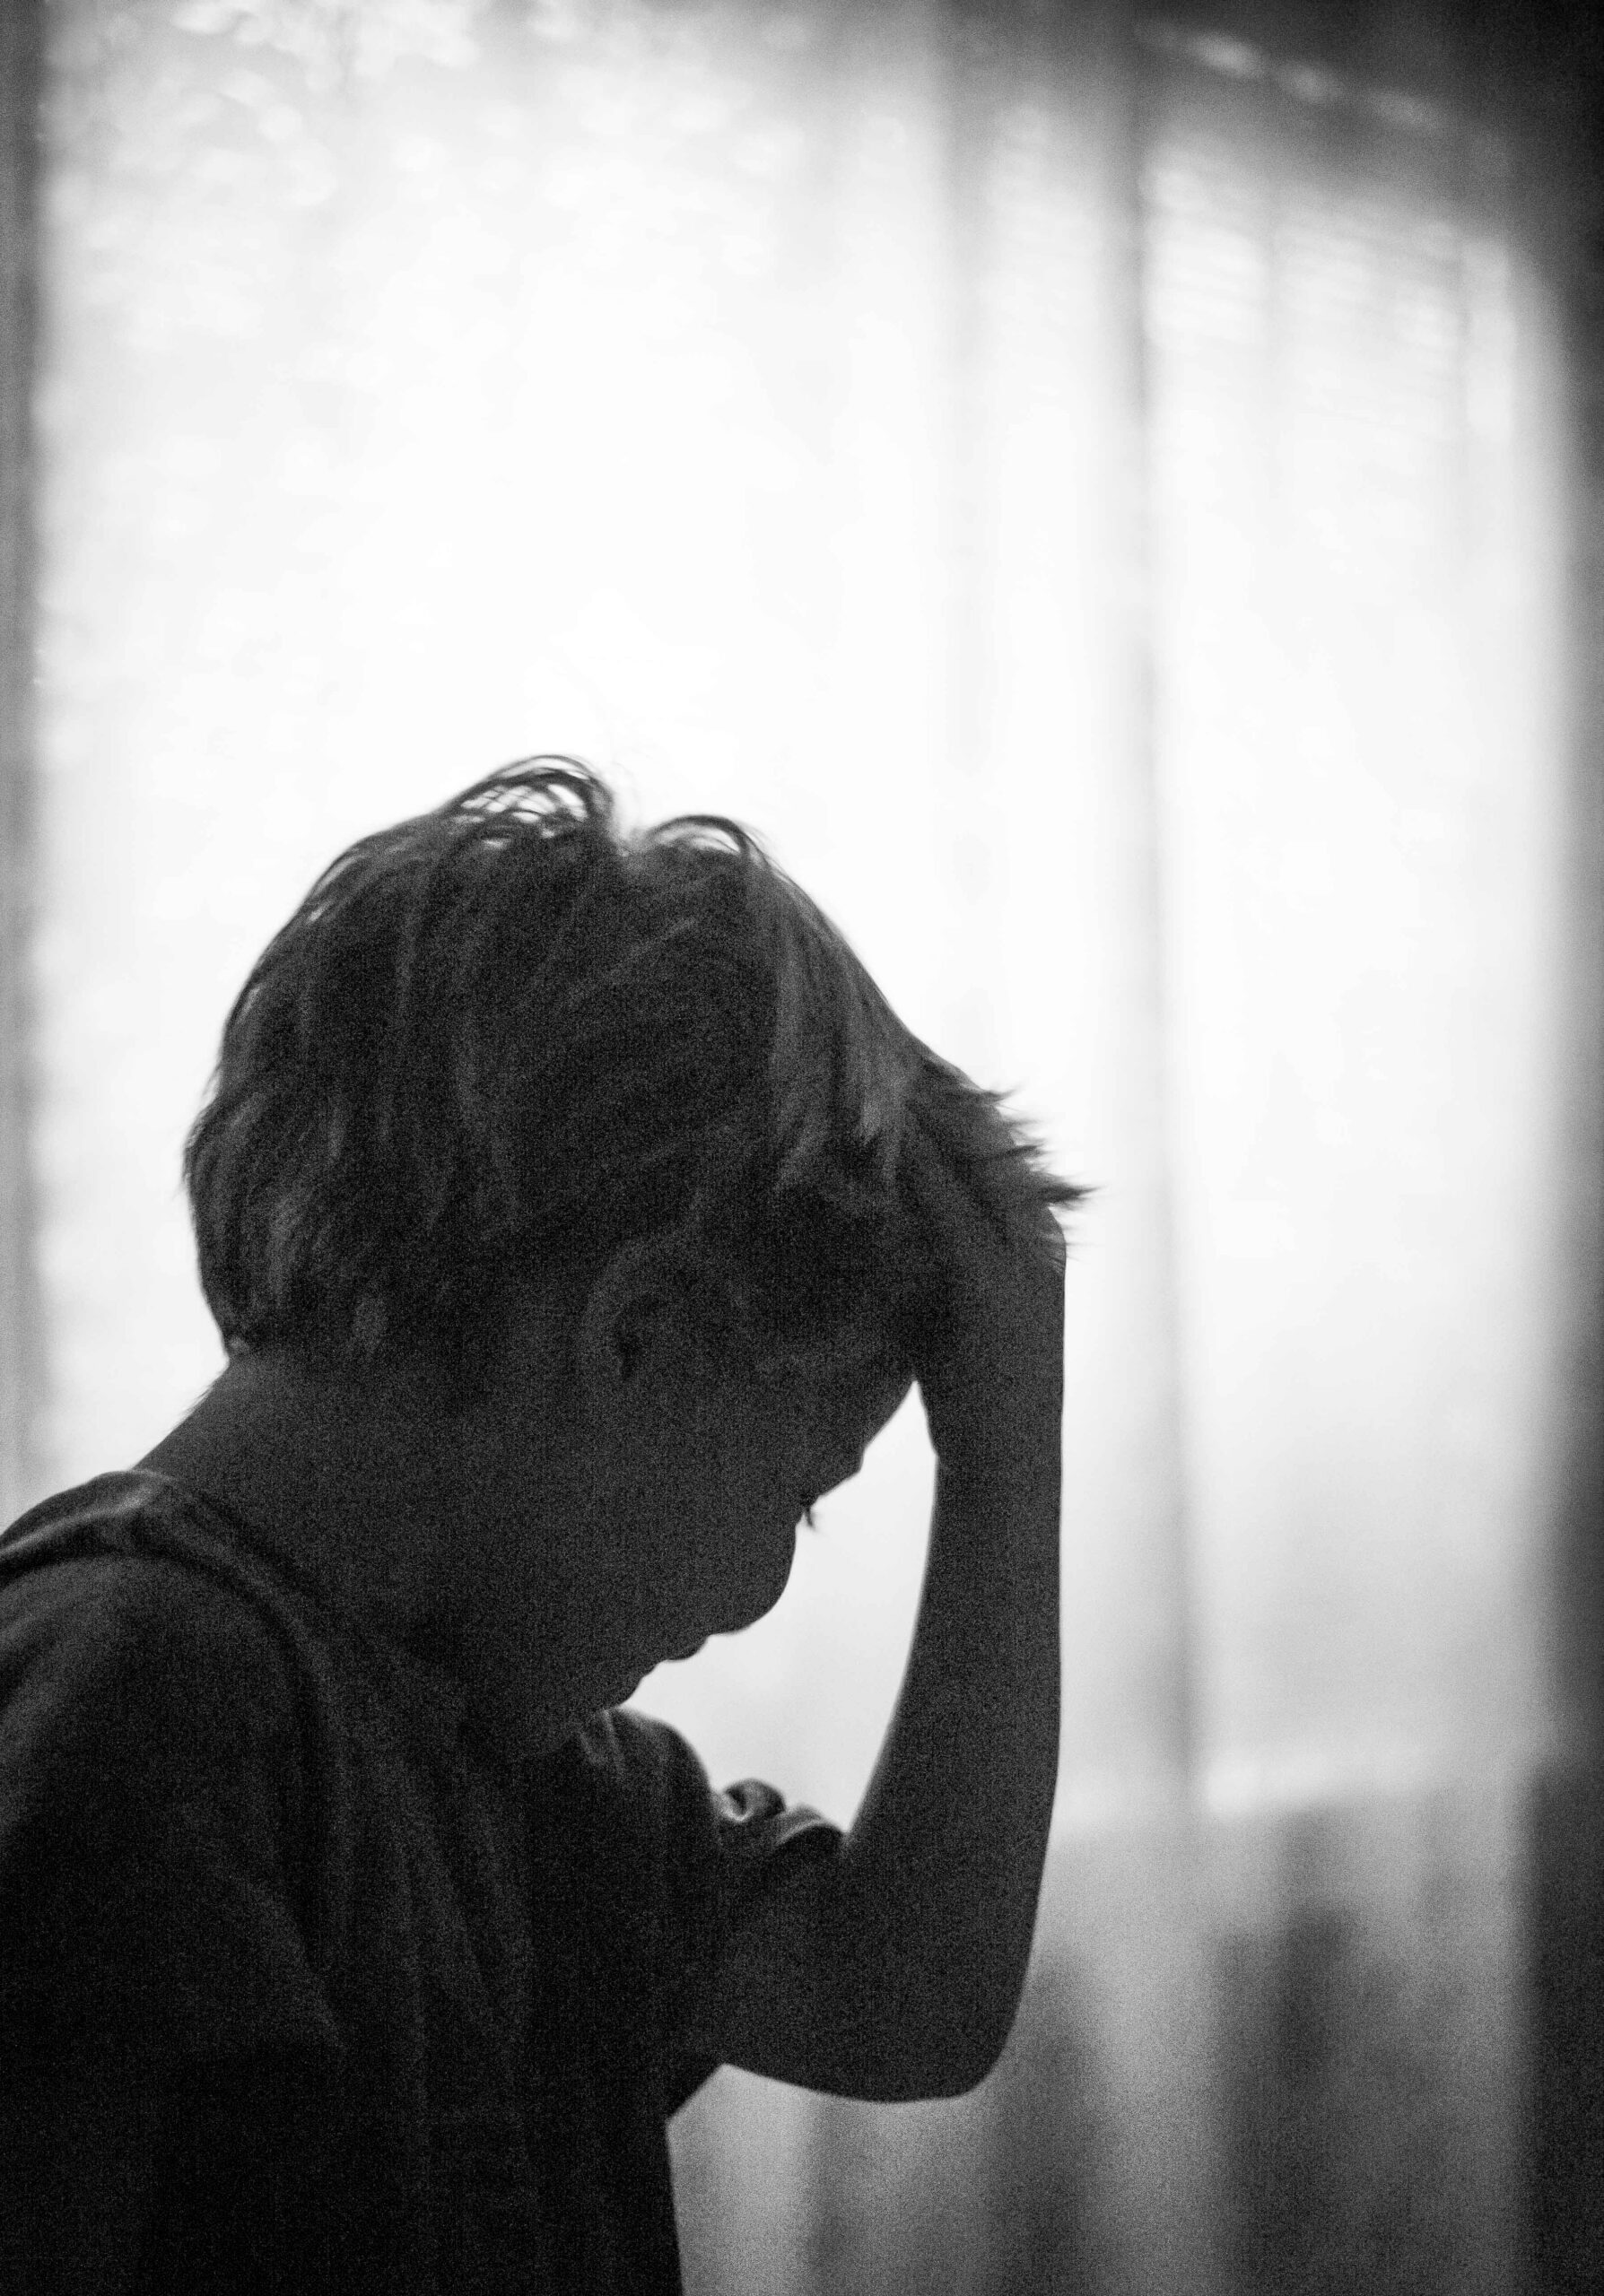 The profile of a young boy. His forehead rests in his hand, his fingers press his hair back, and his eyes are closed.